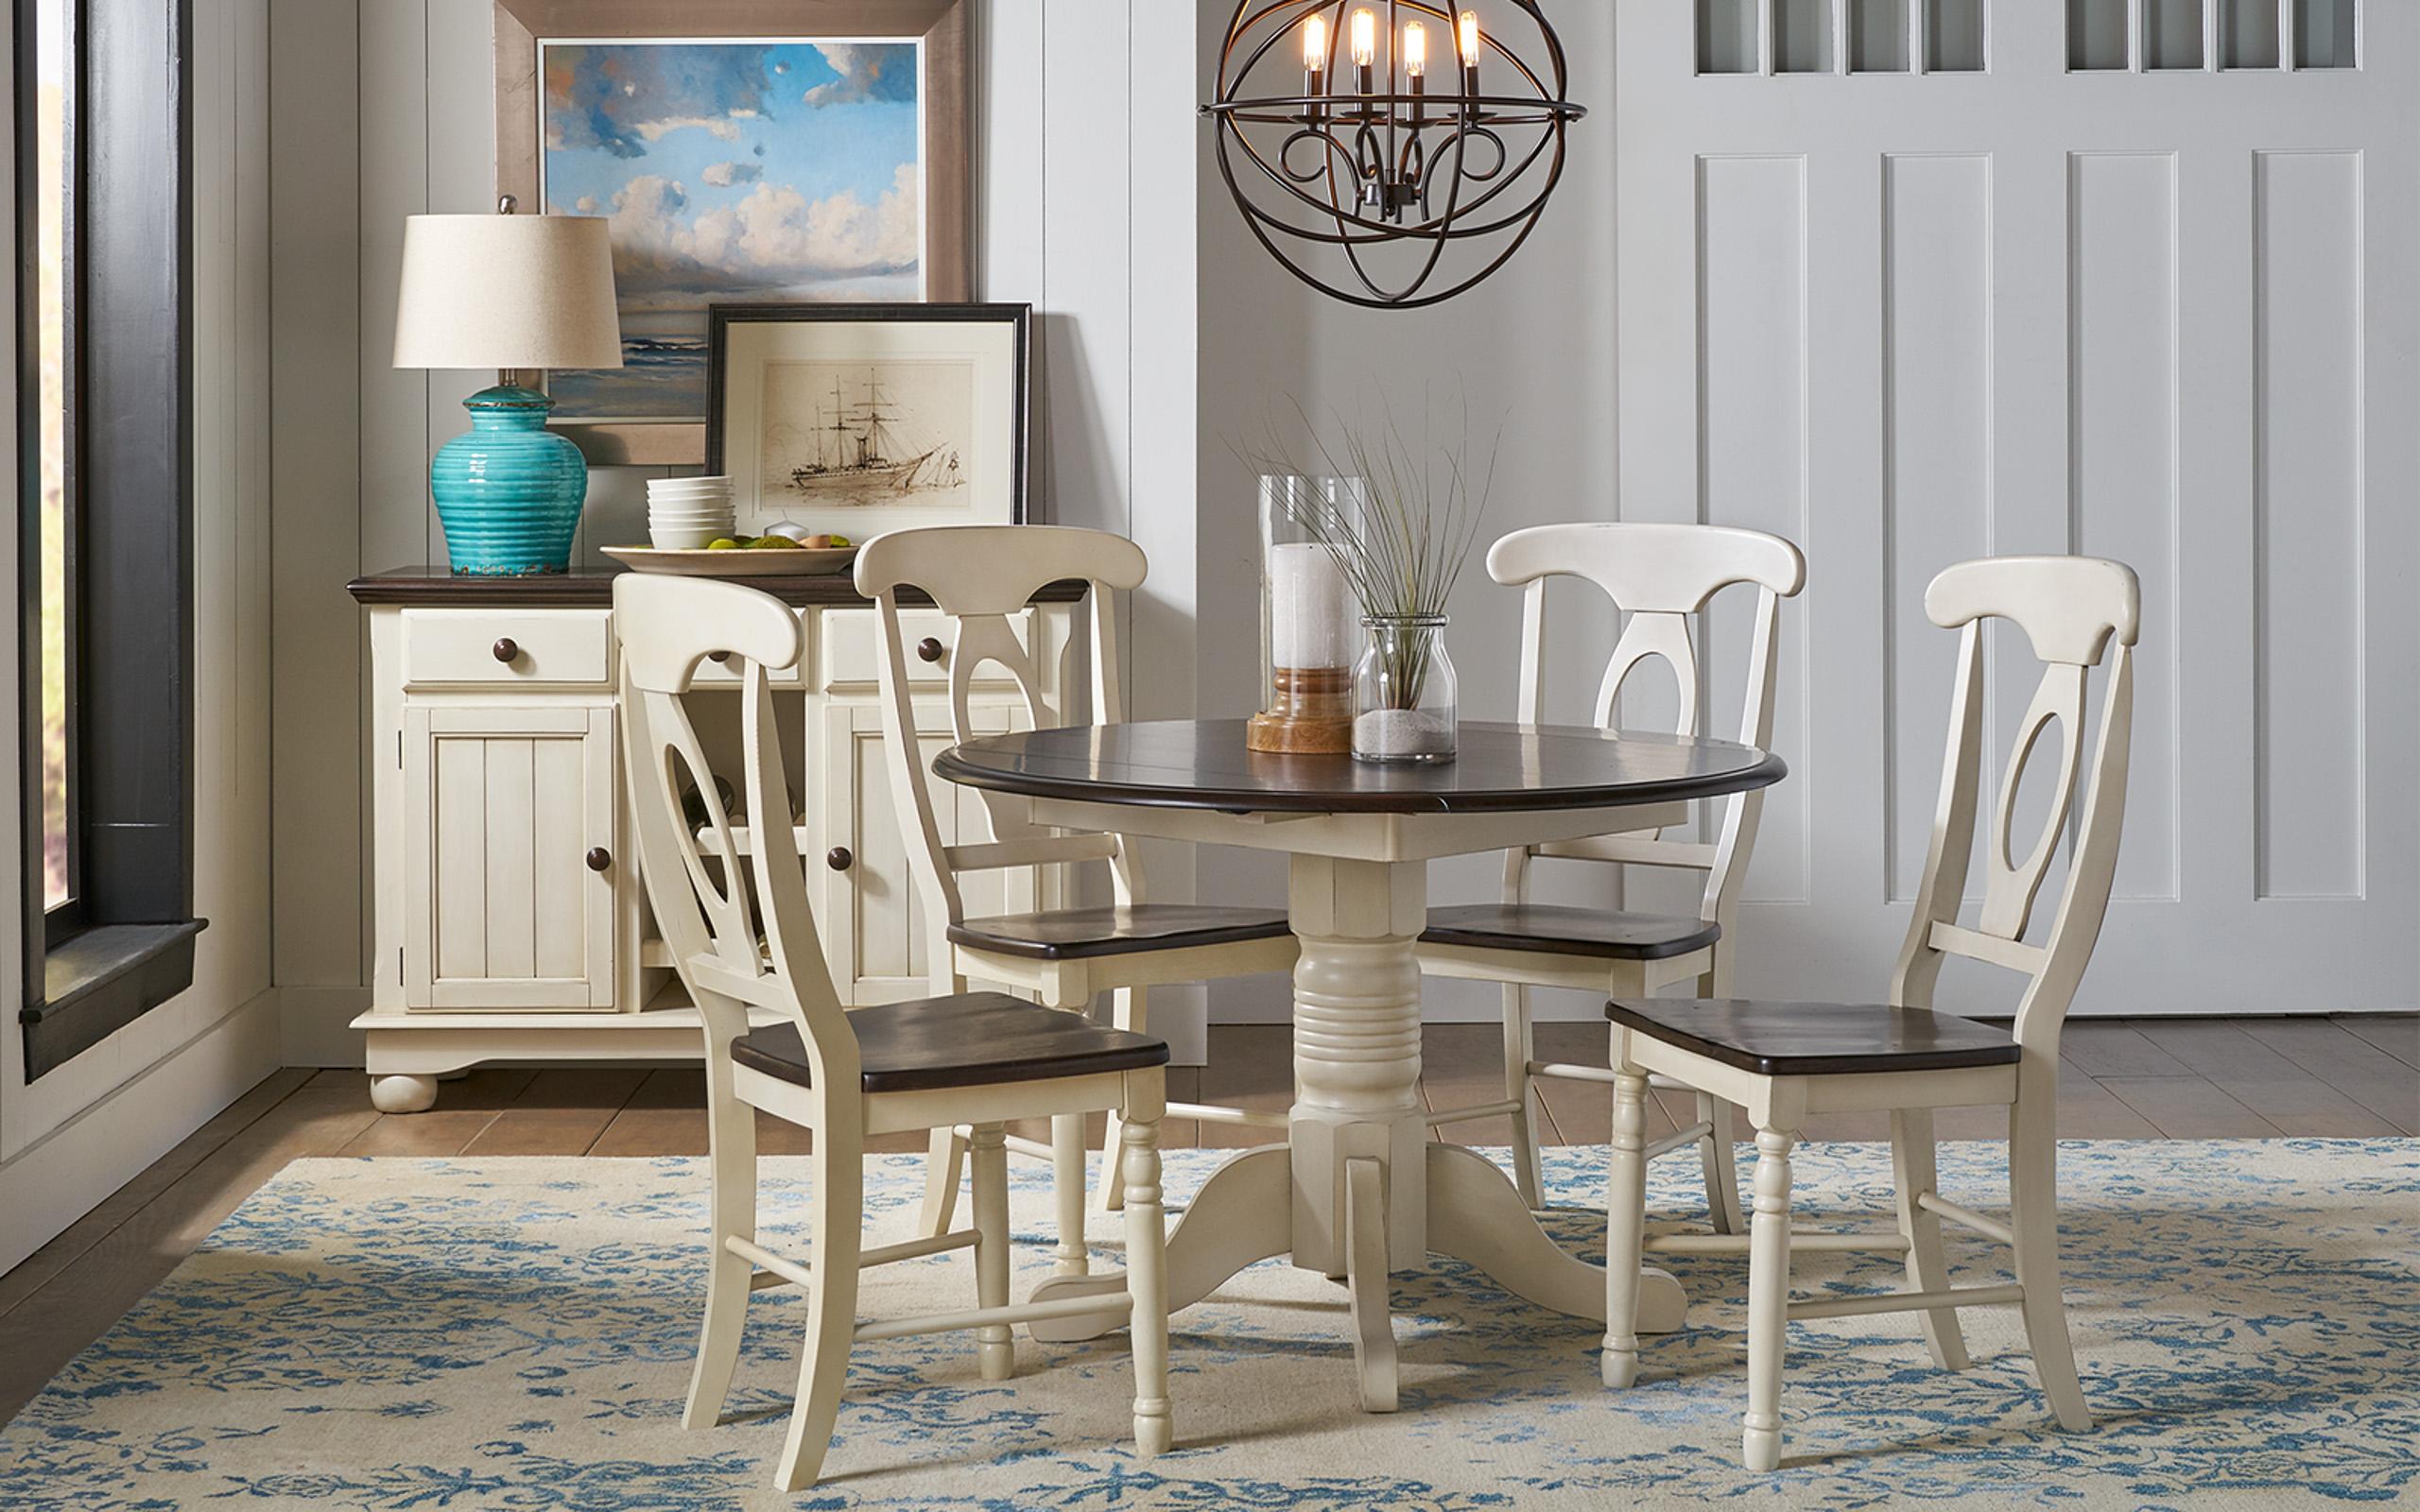 Rustic Dining Table Set British Isles CO BRICO6100-Set-6 in Brown, White 